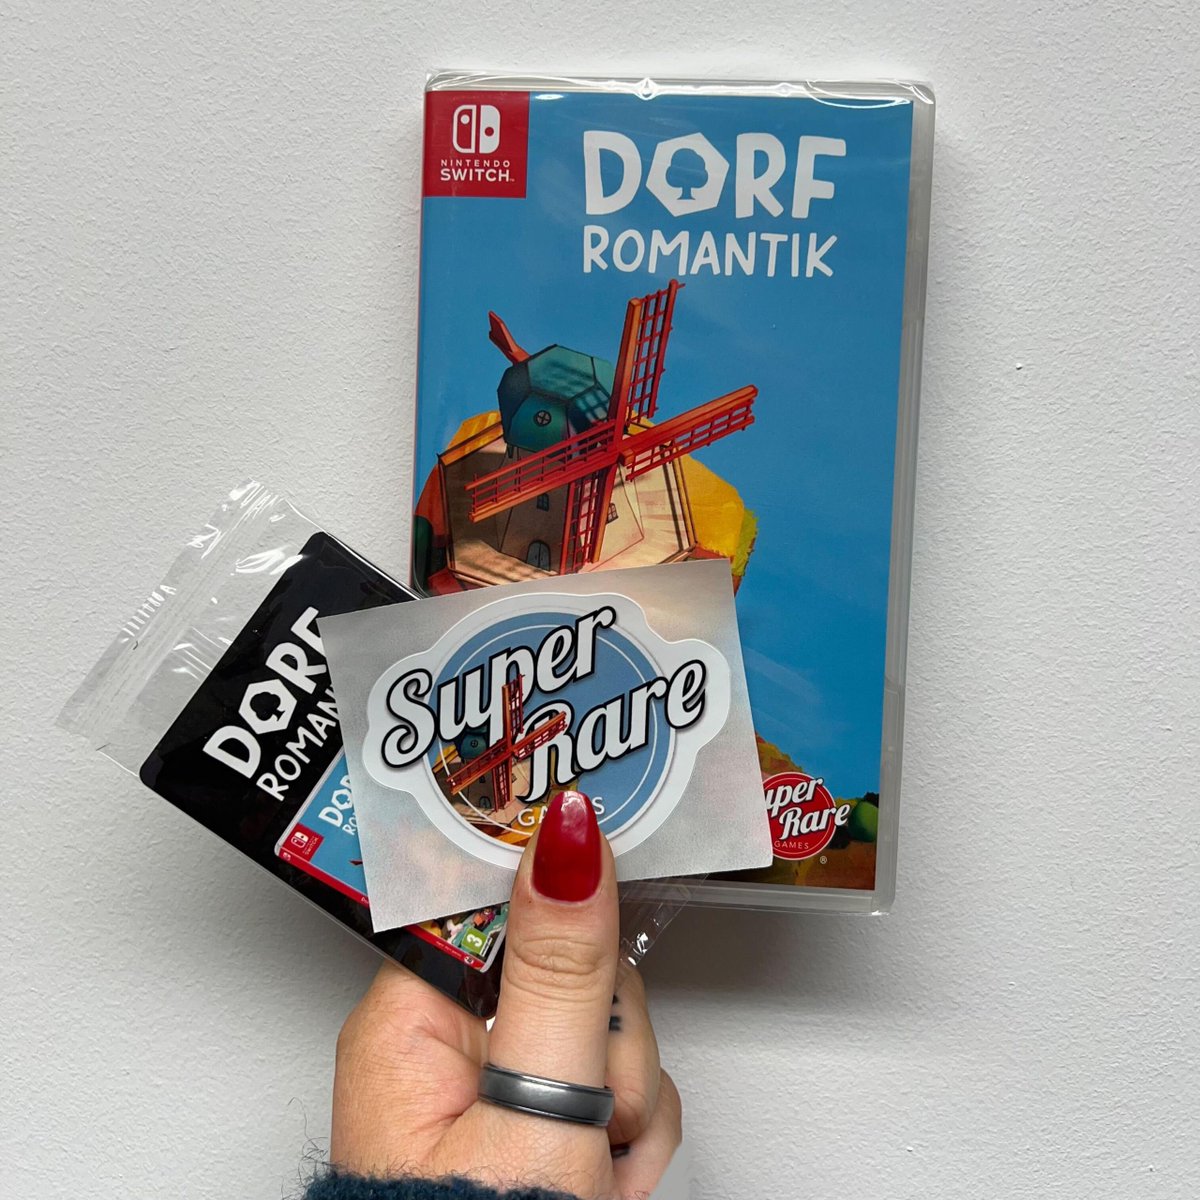 Build the world of your dreams in Dorfromantik, now in hand! 🌍